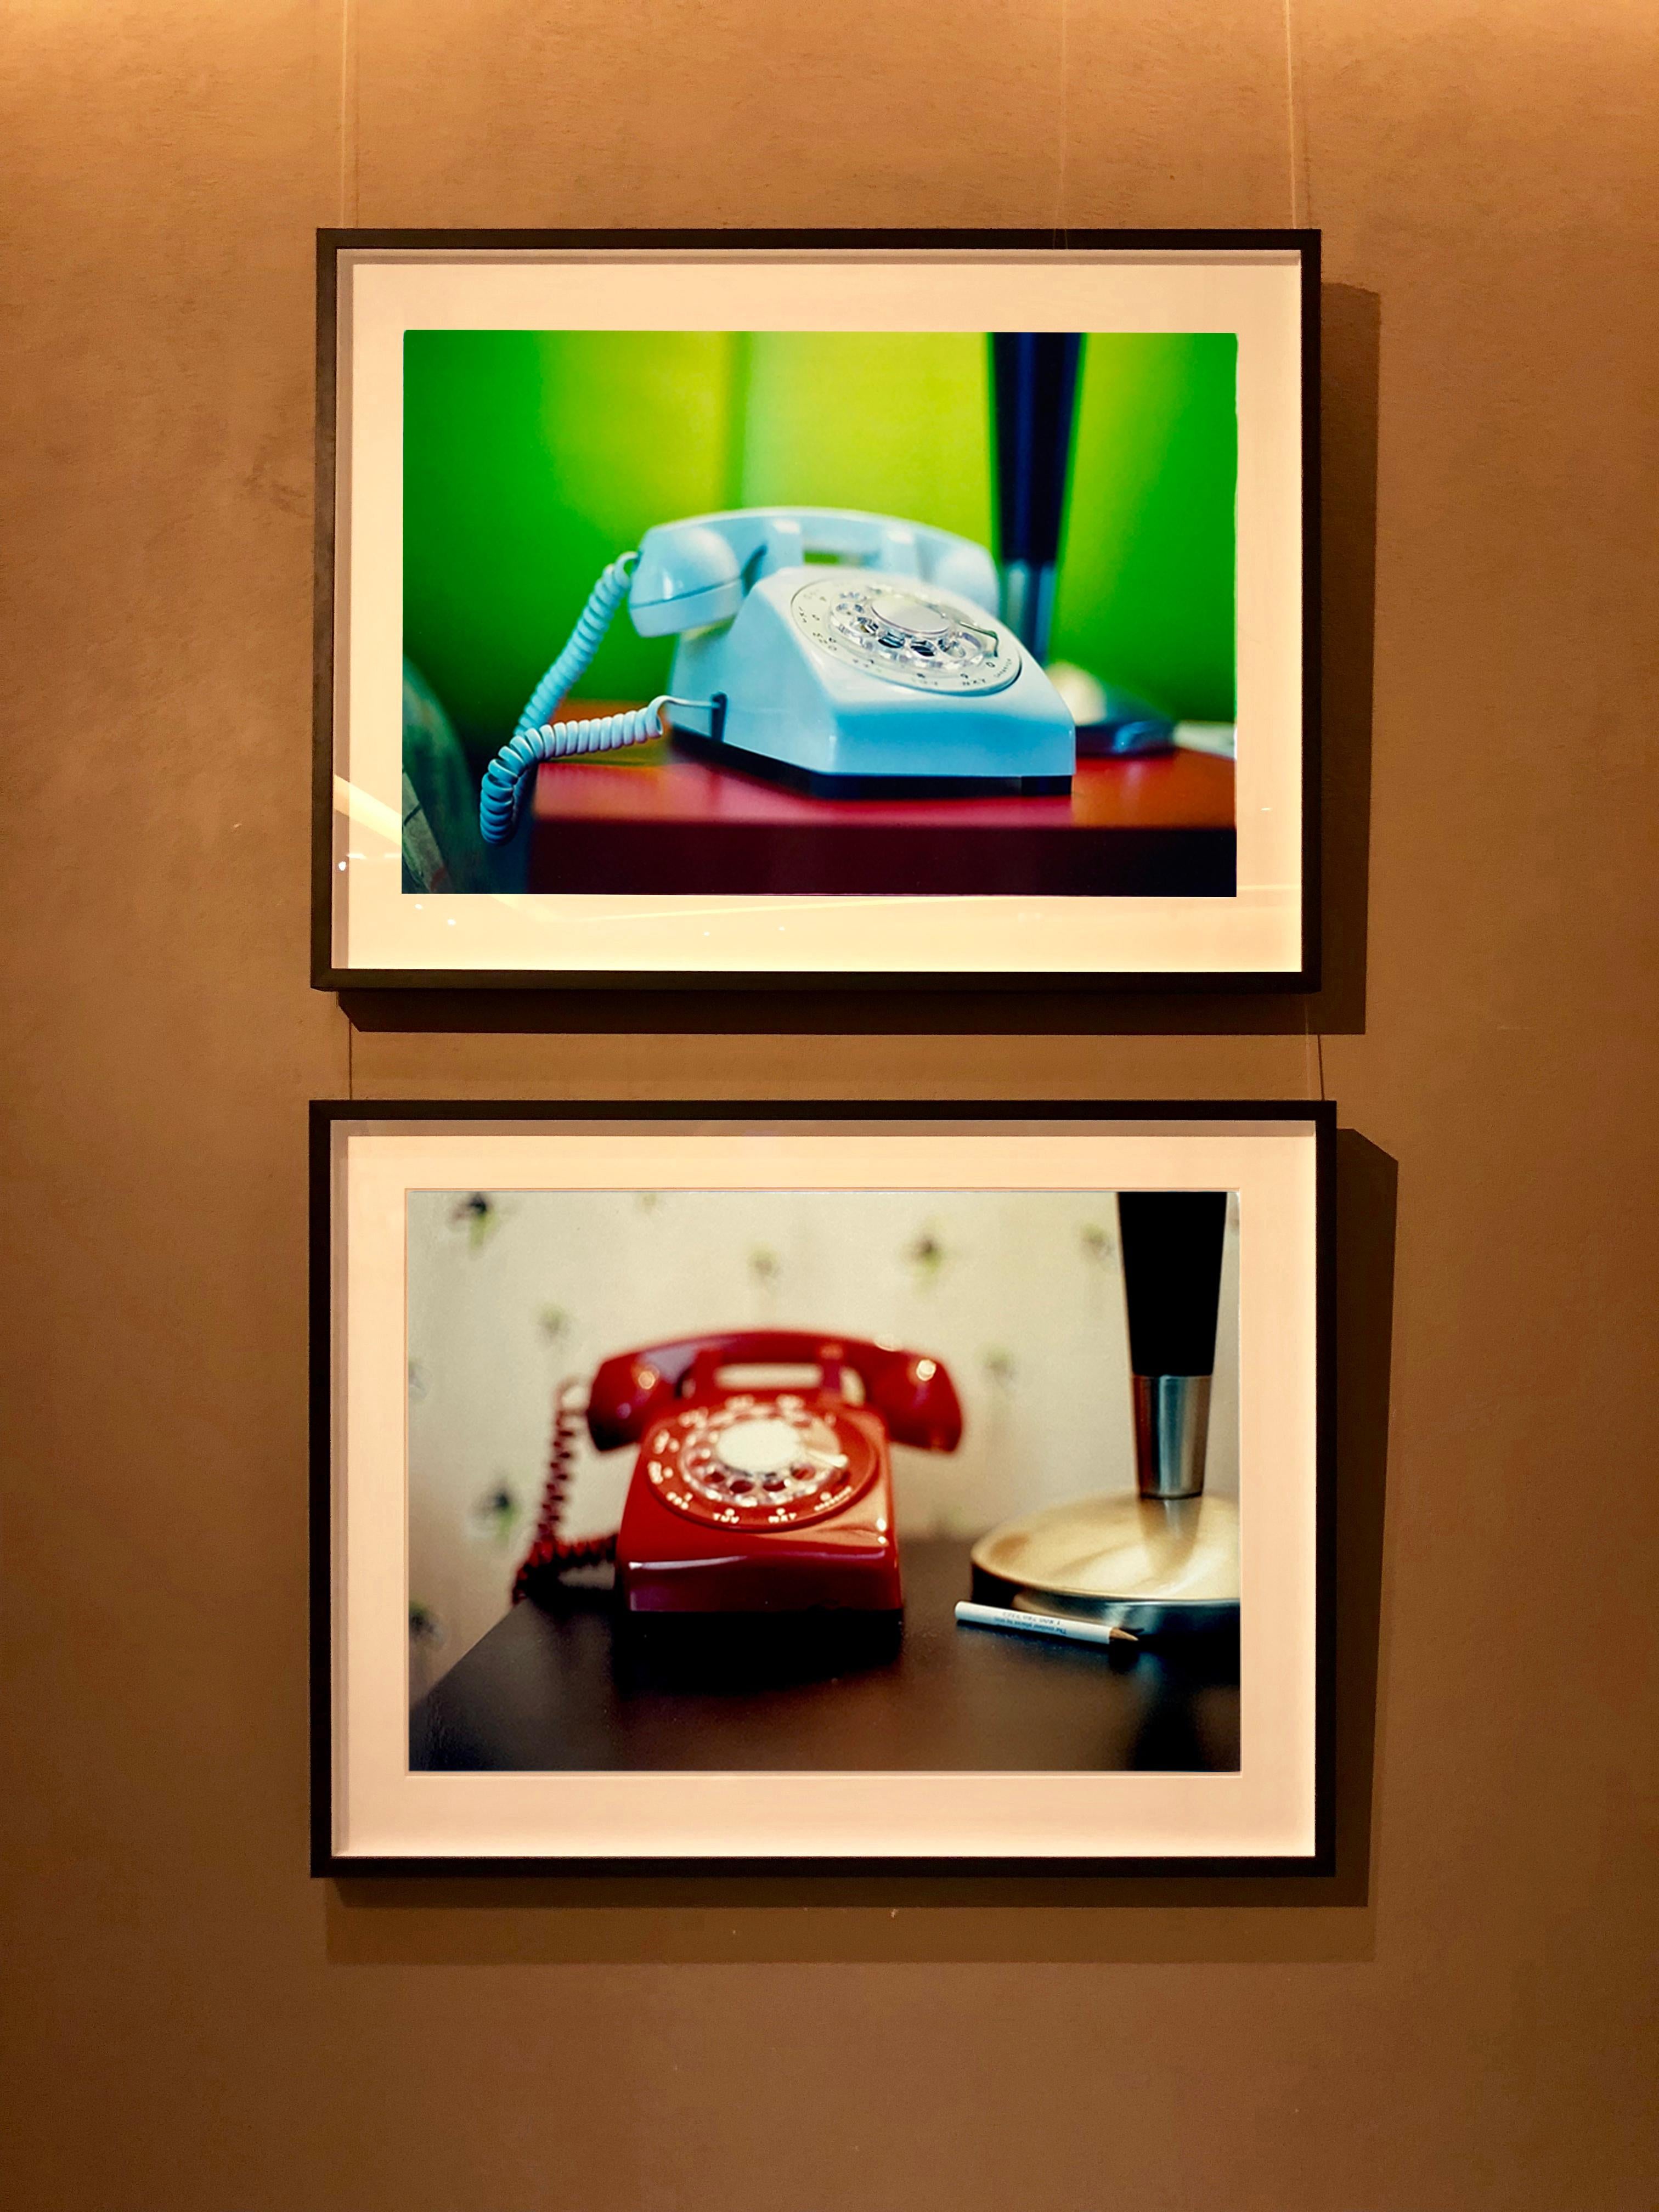 Part of Richard Heeps 'Dream in Colour' Series, this cool Palm Springs interiors picture featuring a vintage telephone on a nightstand combines gorgeous colours and dreamy nostalgic mid-century vibes.

This artwork is a limited edition of 25 gloss